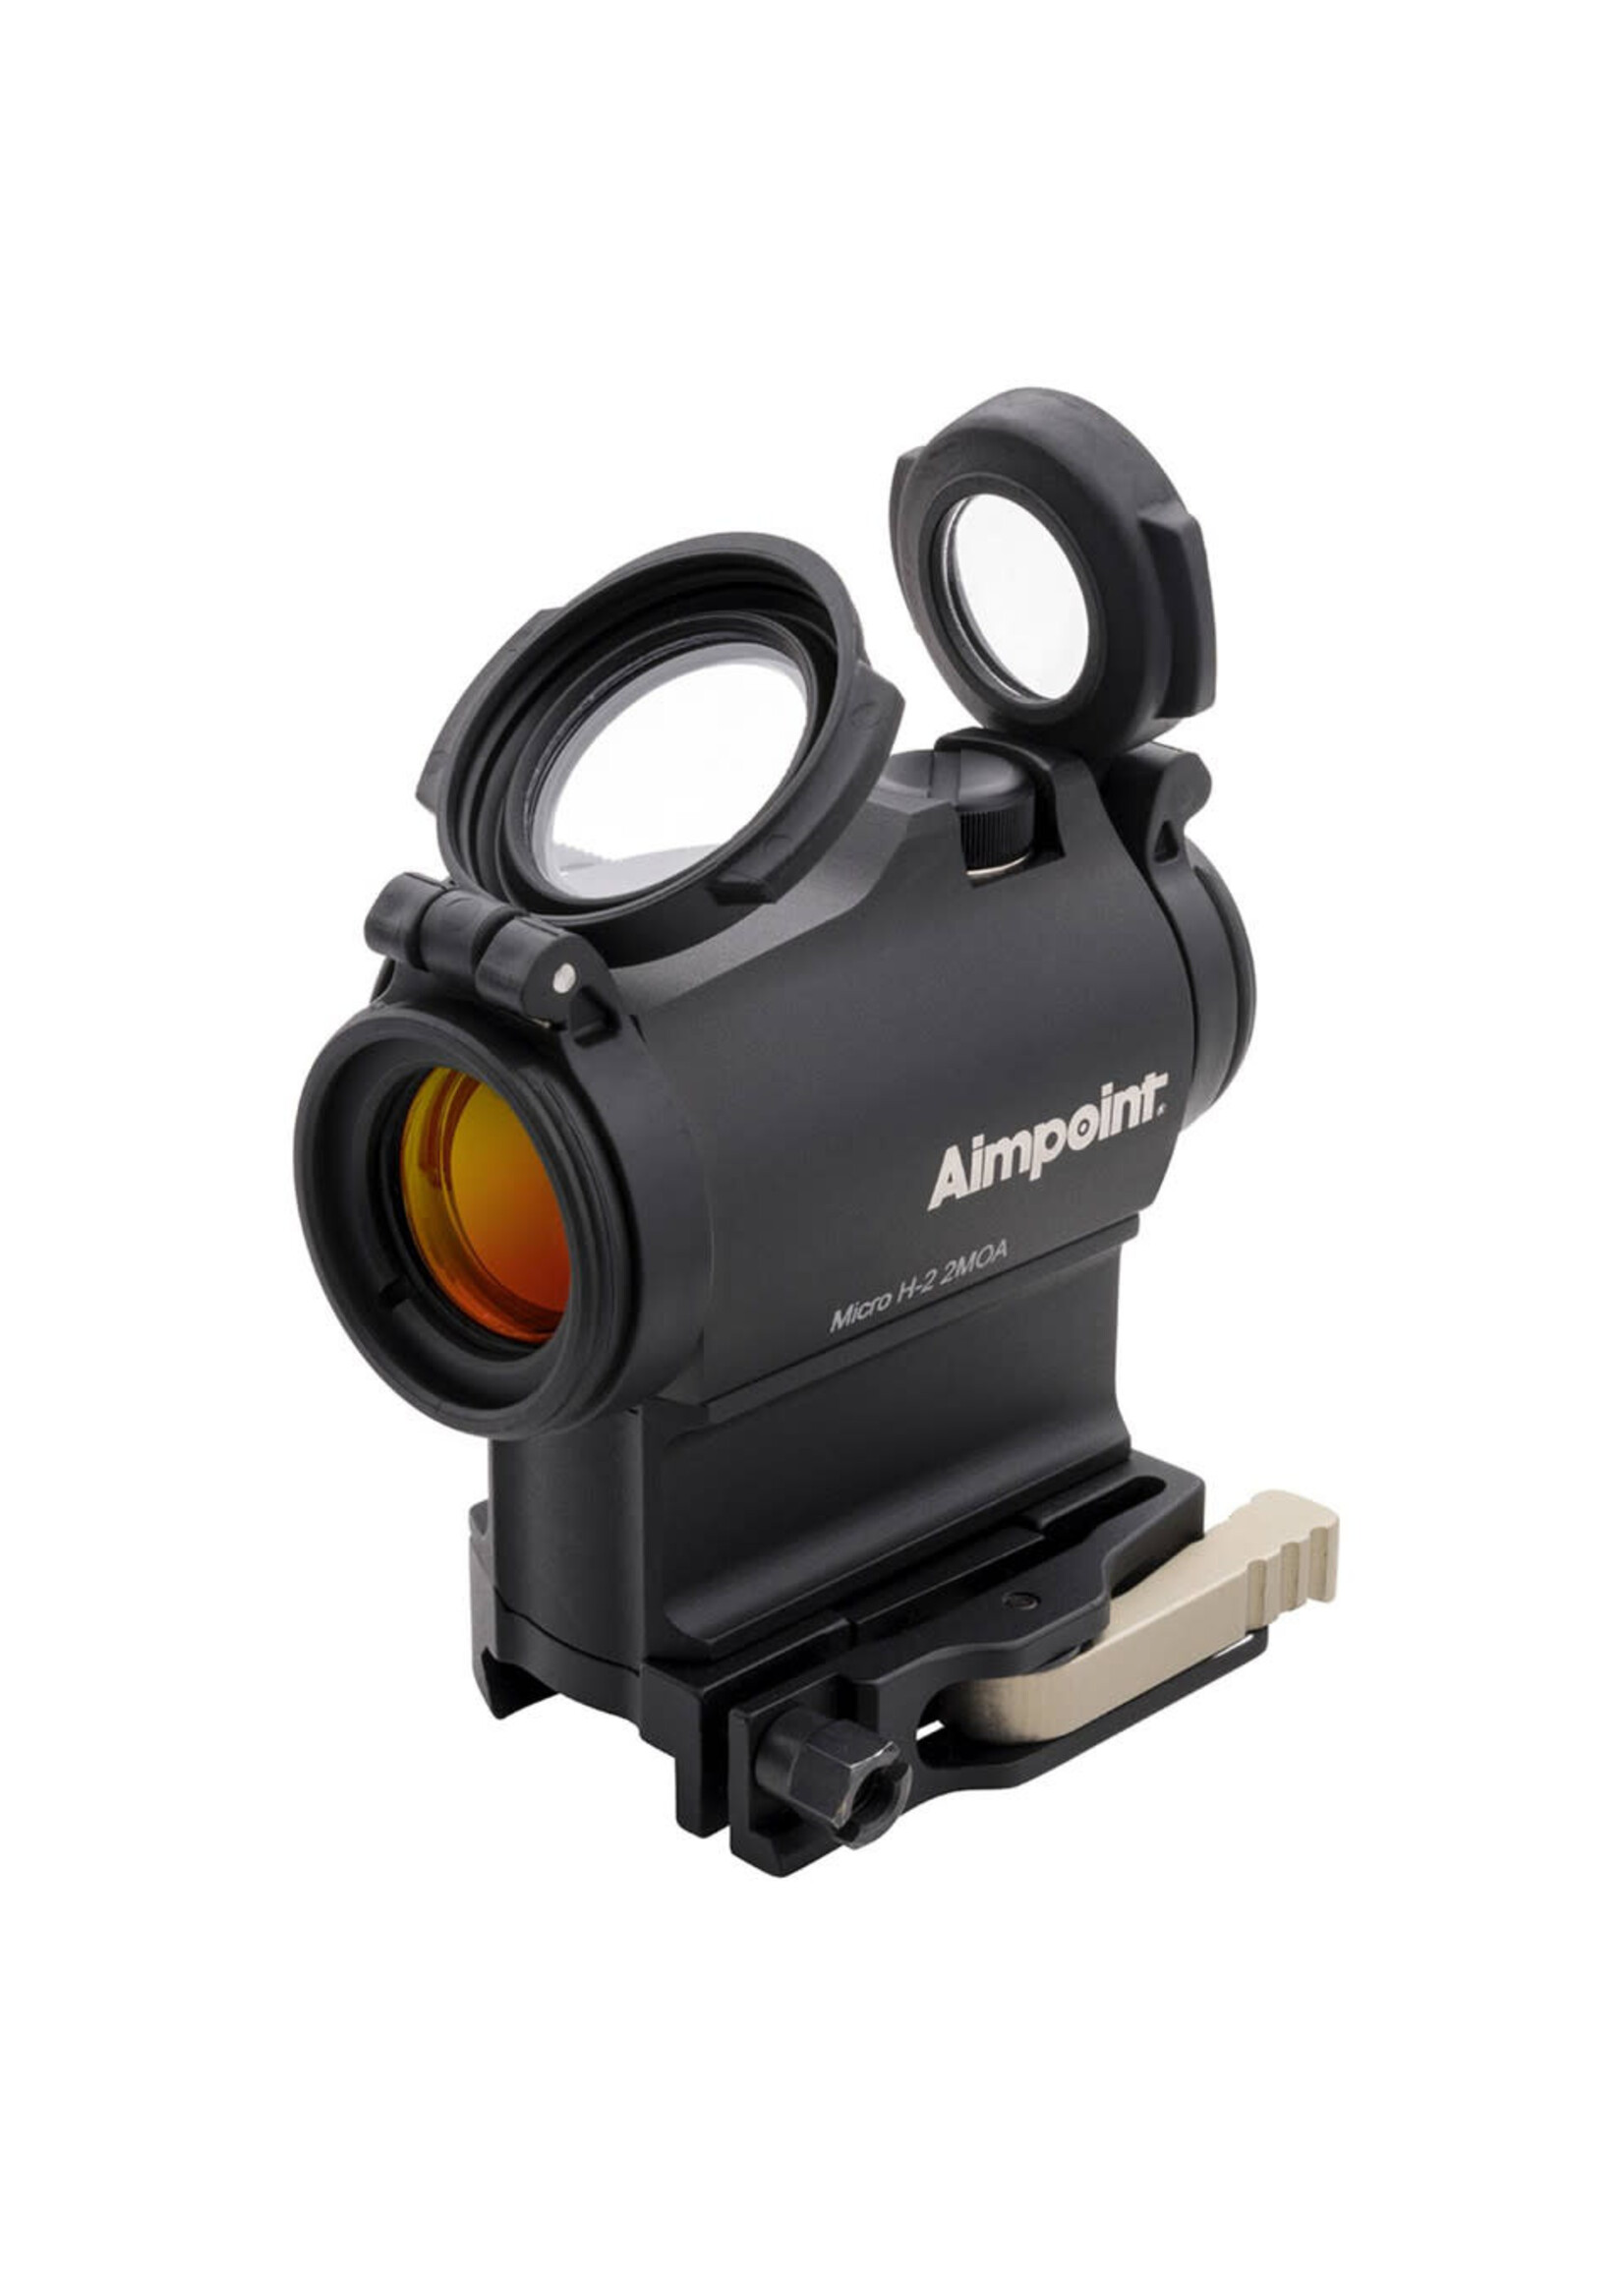 AIMPOINT MICRO H-2 RED DOT REFLEX SIGHT - AR15 READY